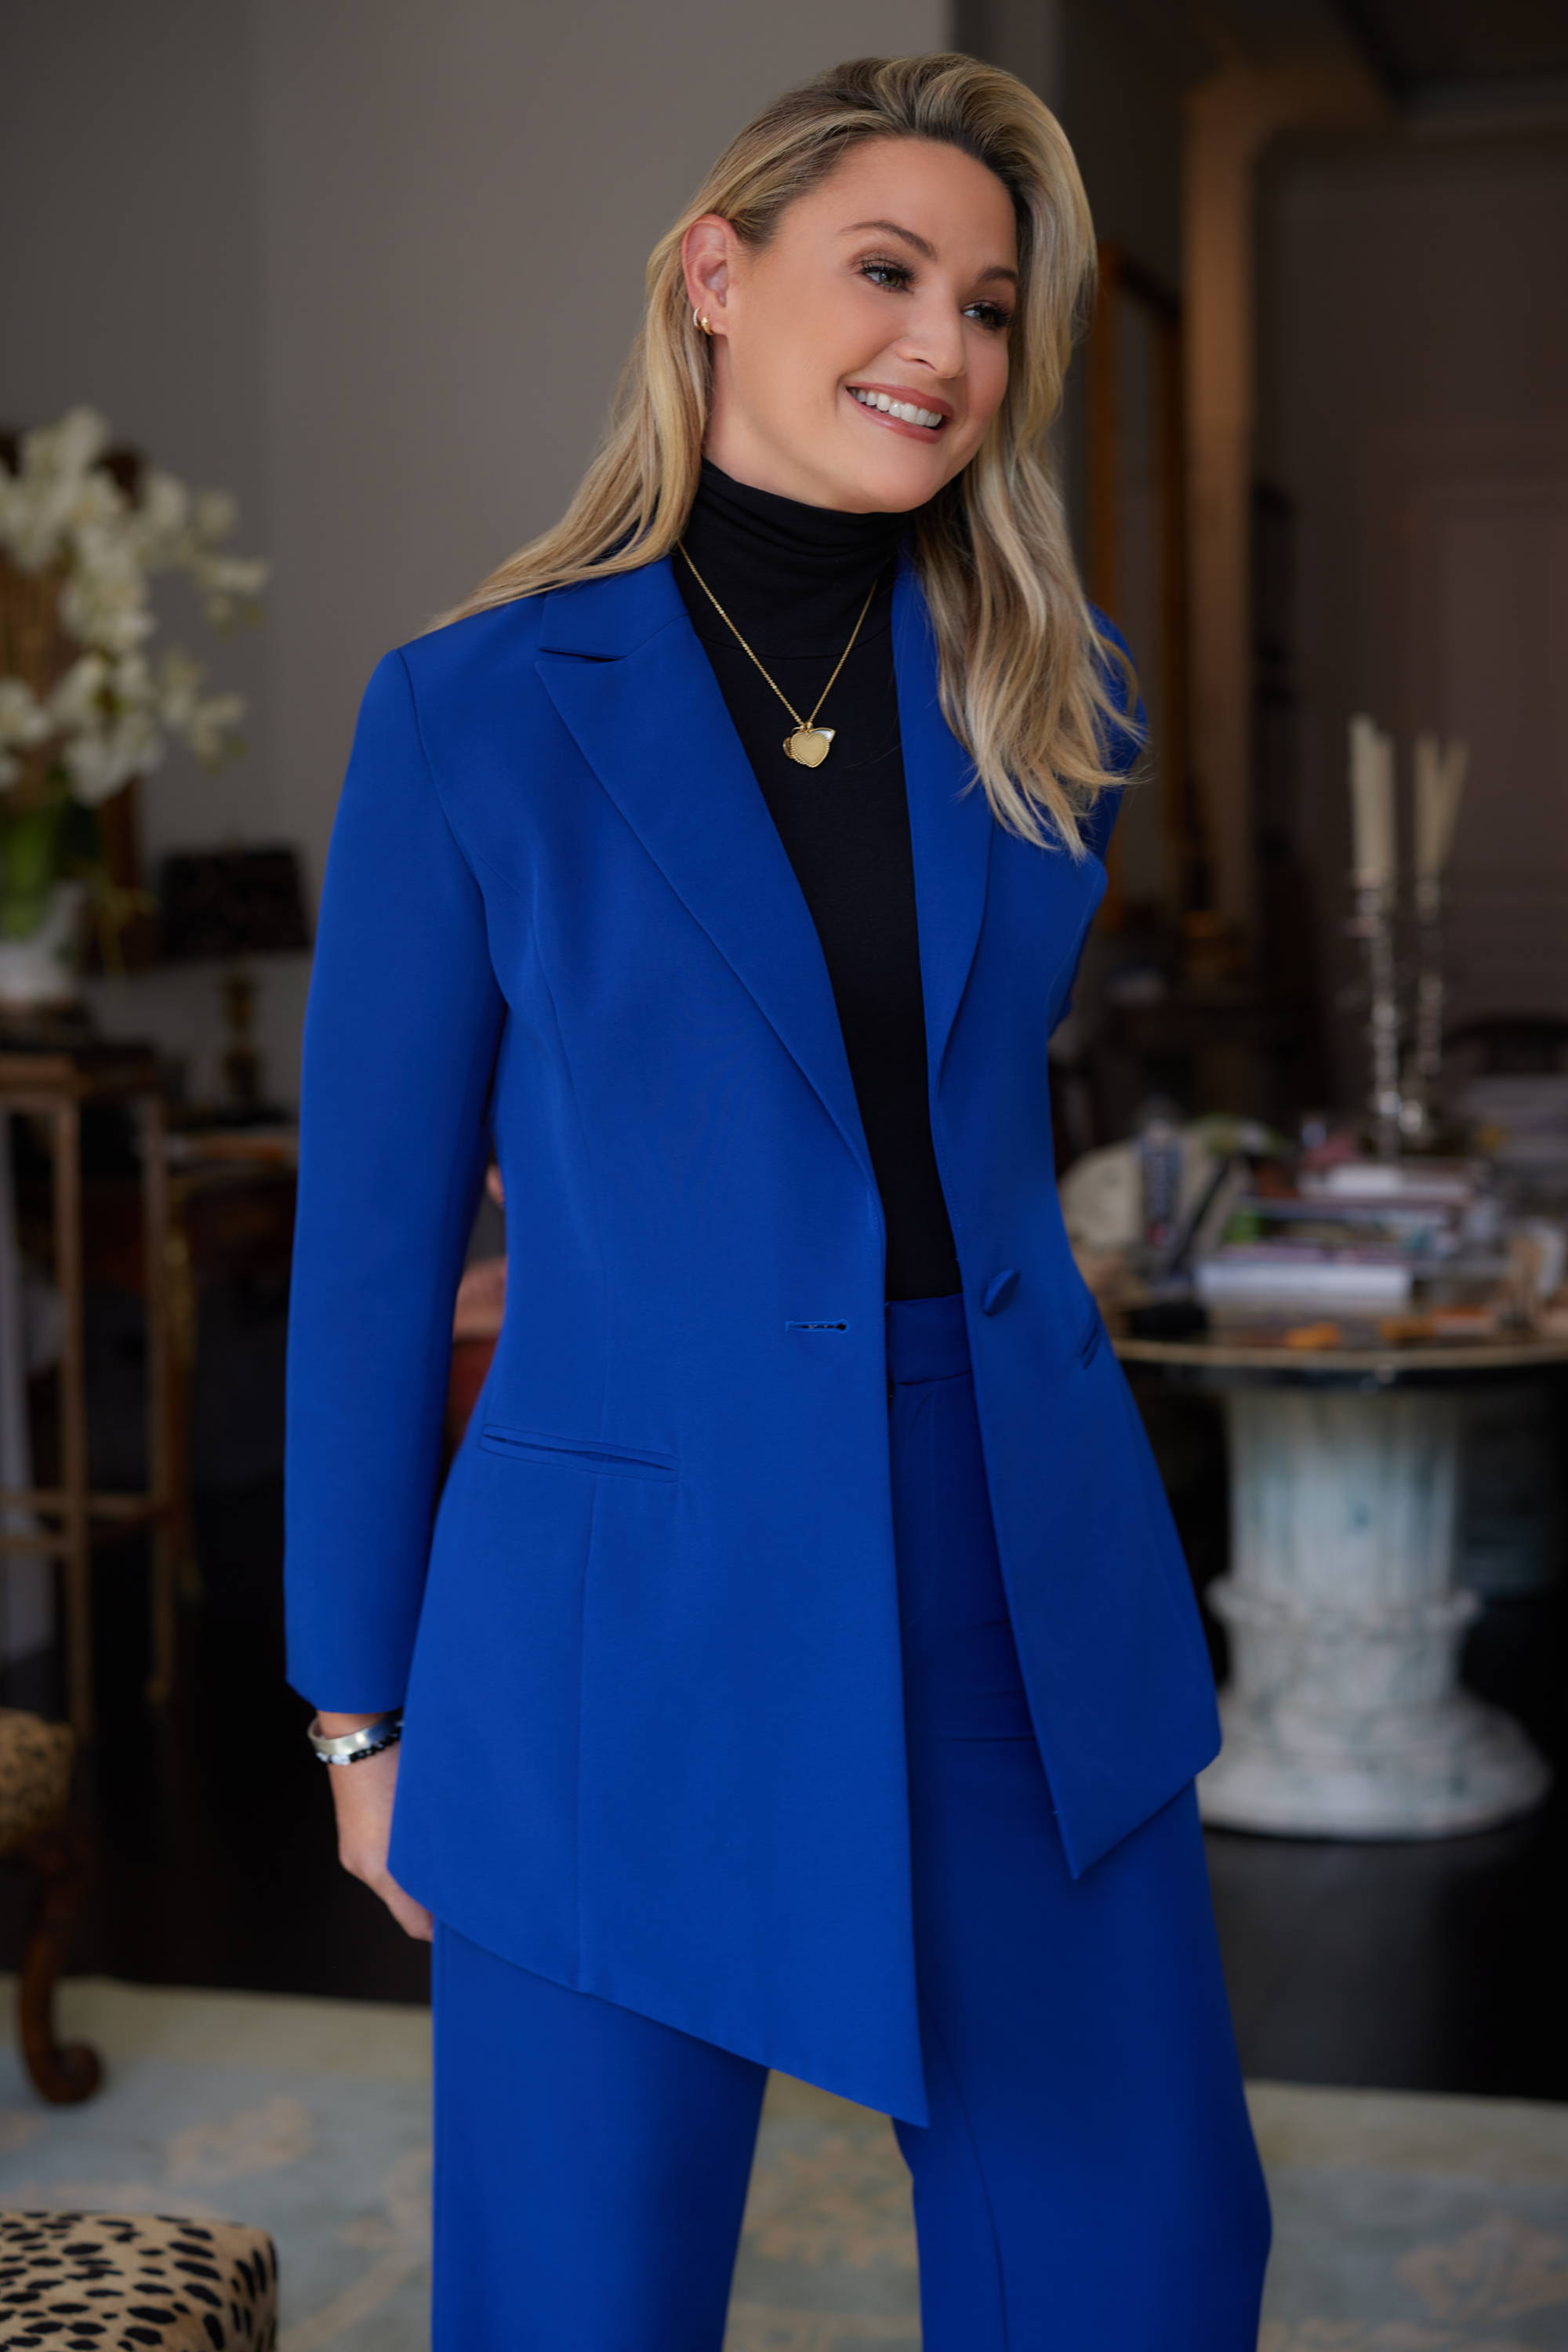 Sunny wearing blue silk lined suit with black turtleneck in New York City by Ala von Auersperg